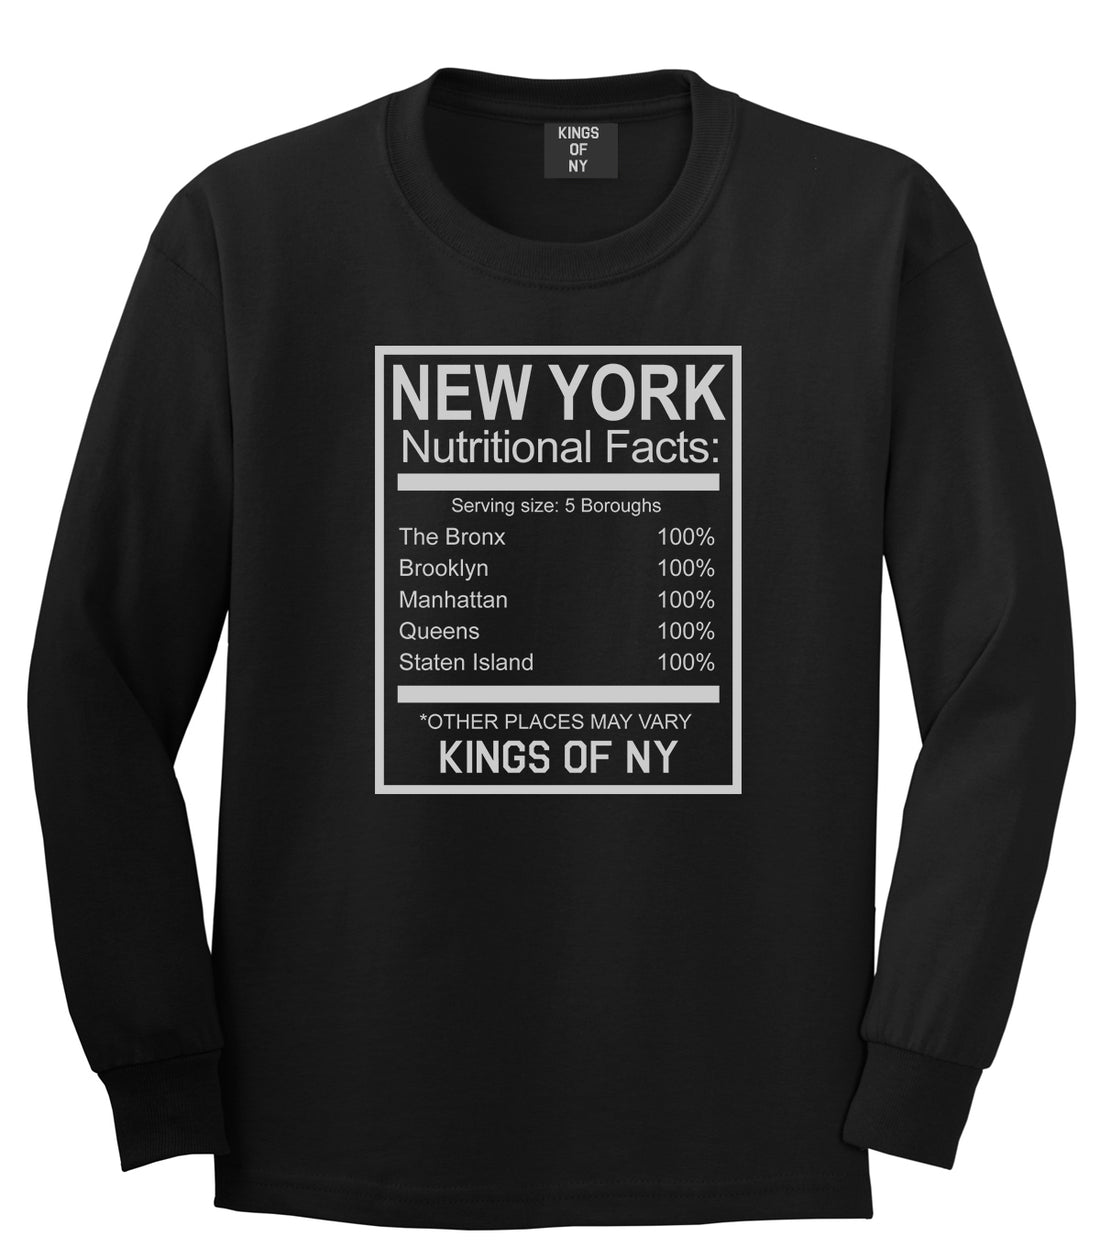 New York Nutritional Facts Long Sleeve T-Shirt in Black